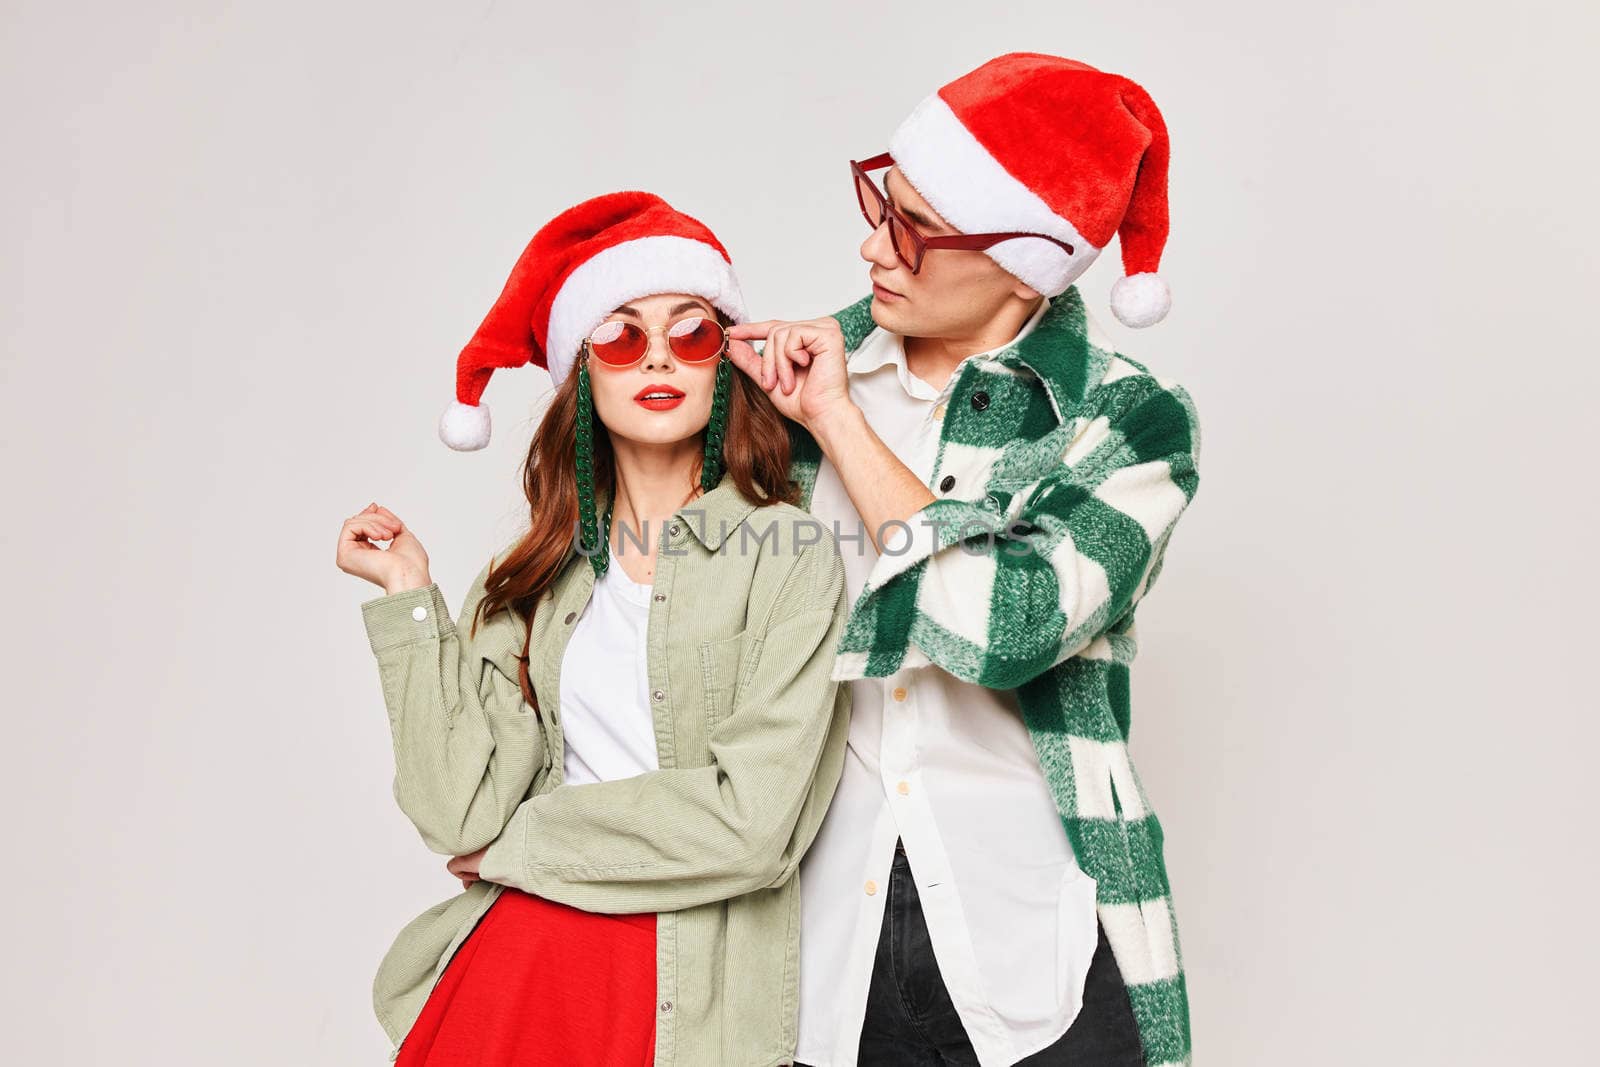 Man and woman in Christmas hats Christmas fun celebration together by SHOTPRIME